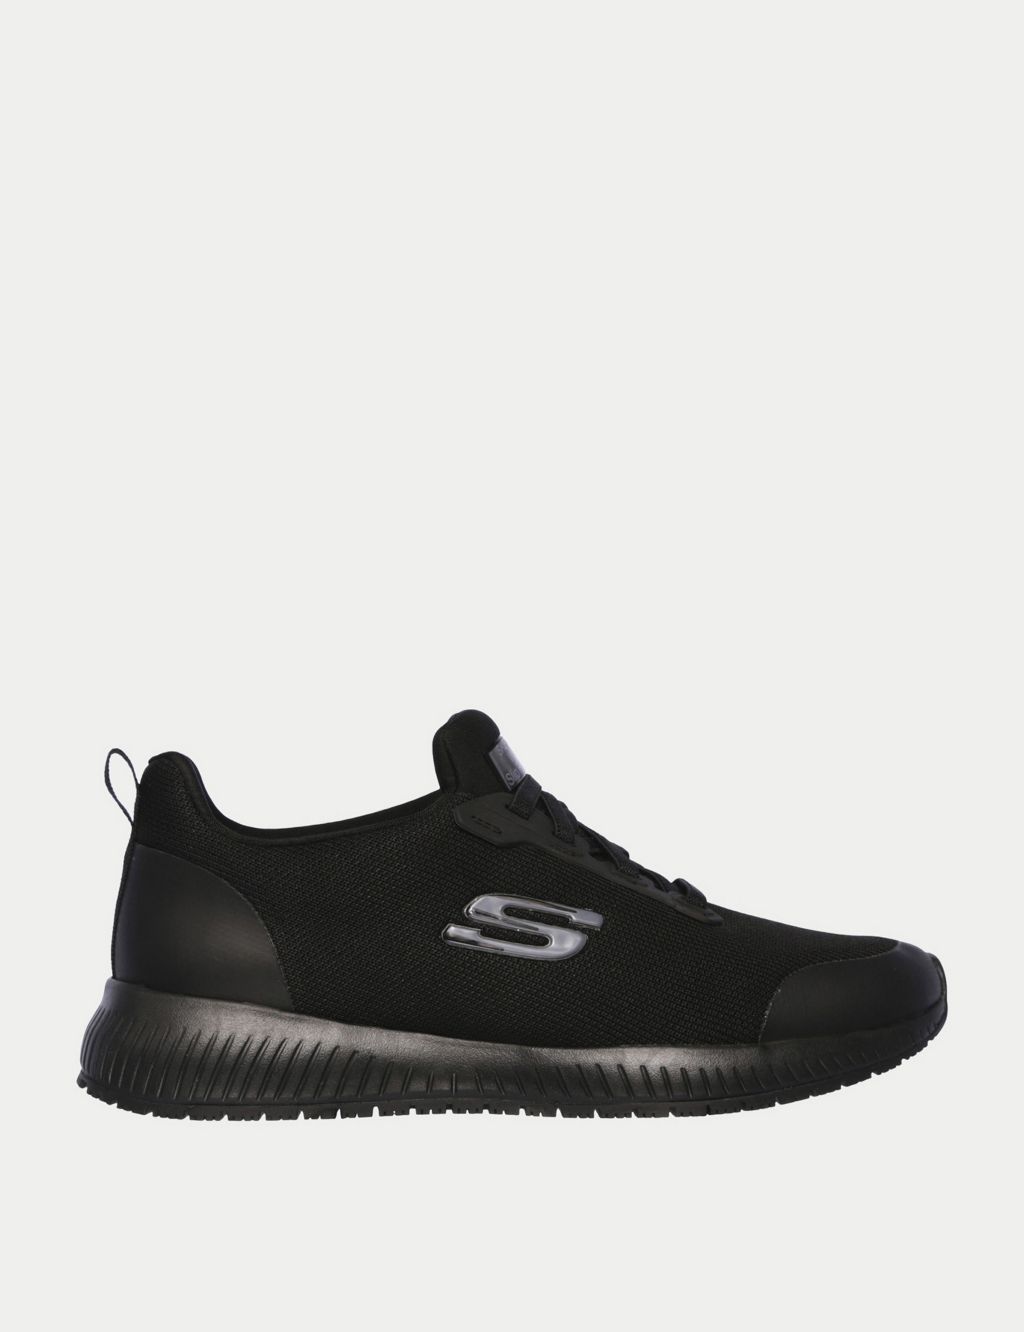 Squad SR Knitted Slip On Trainers image 1